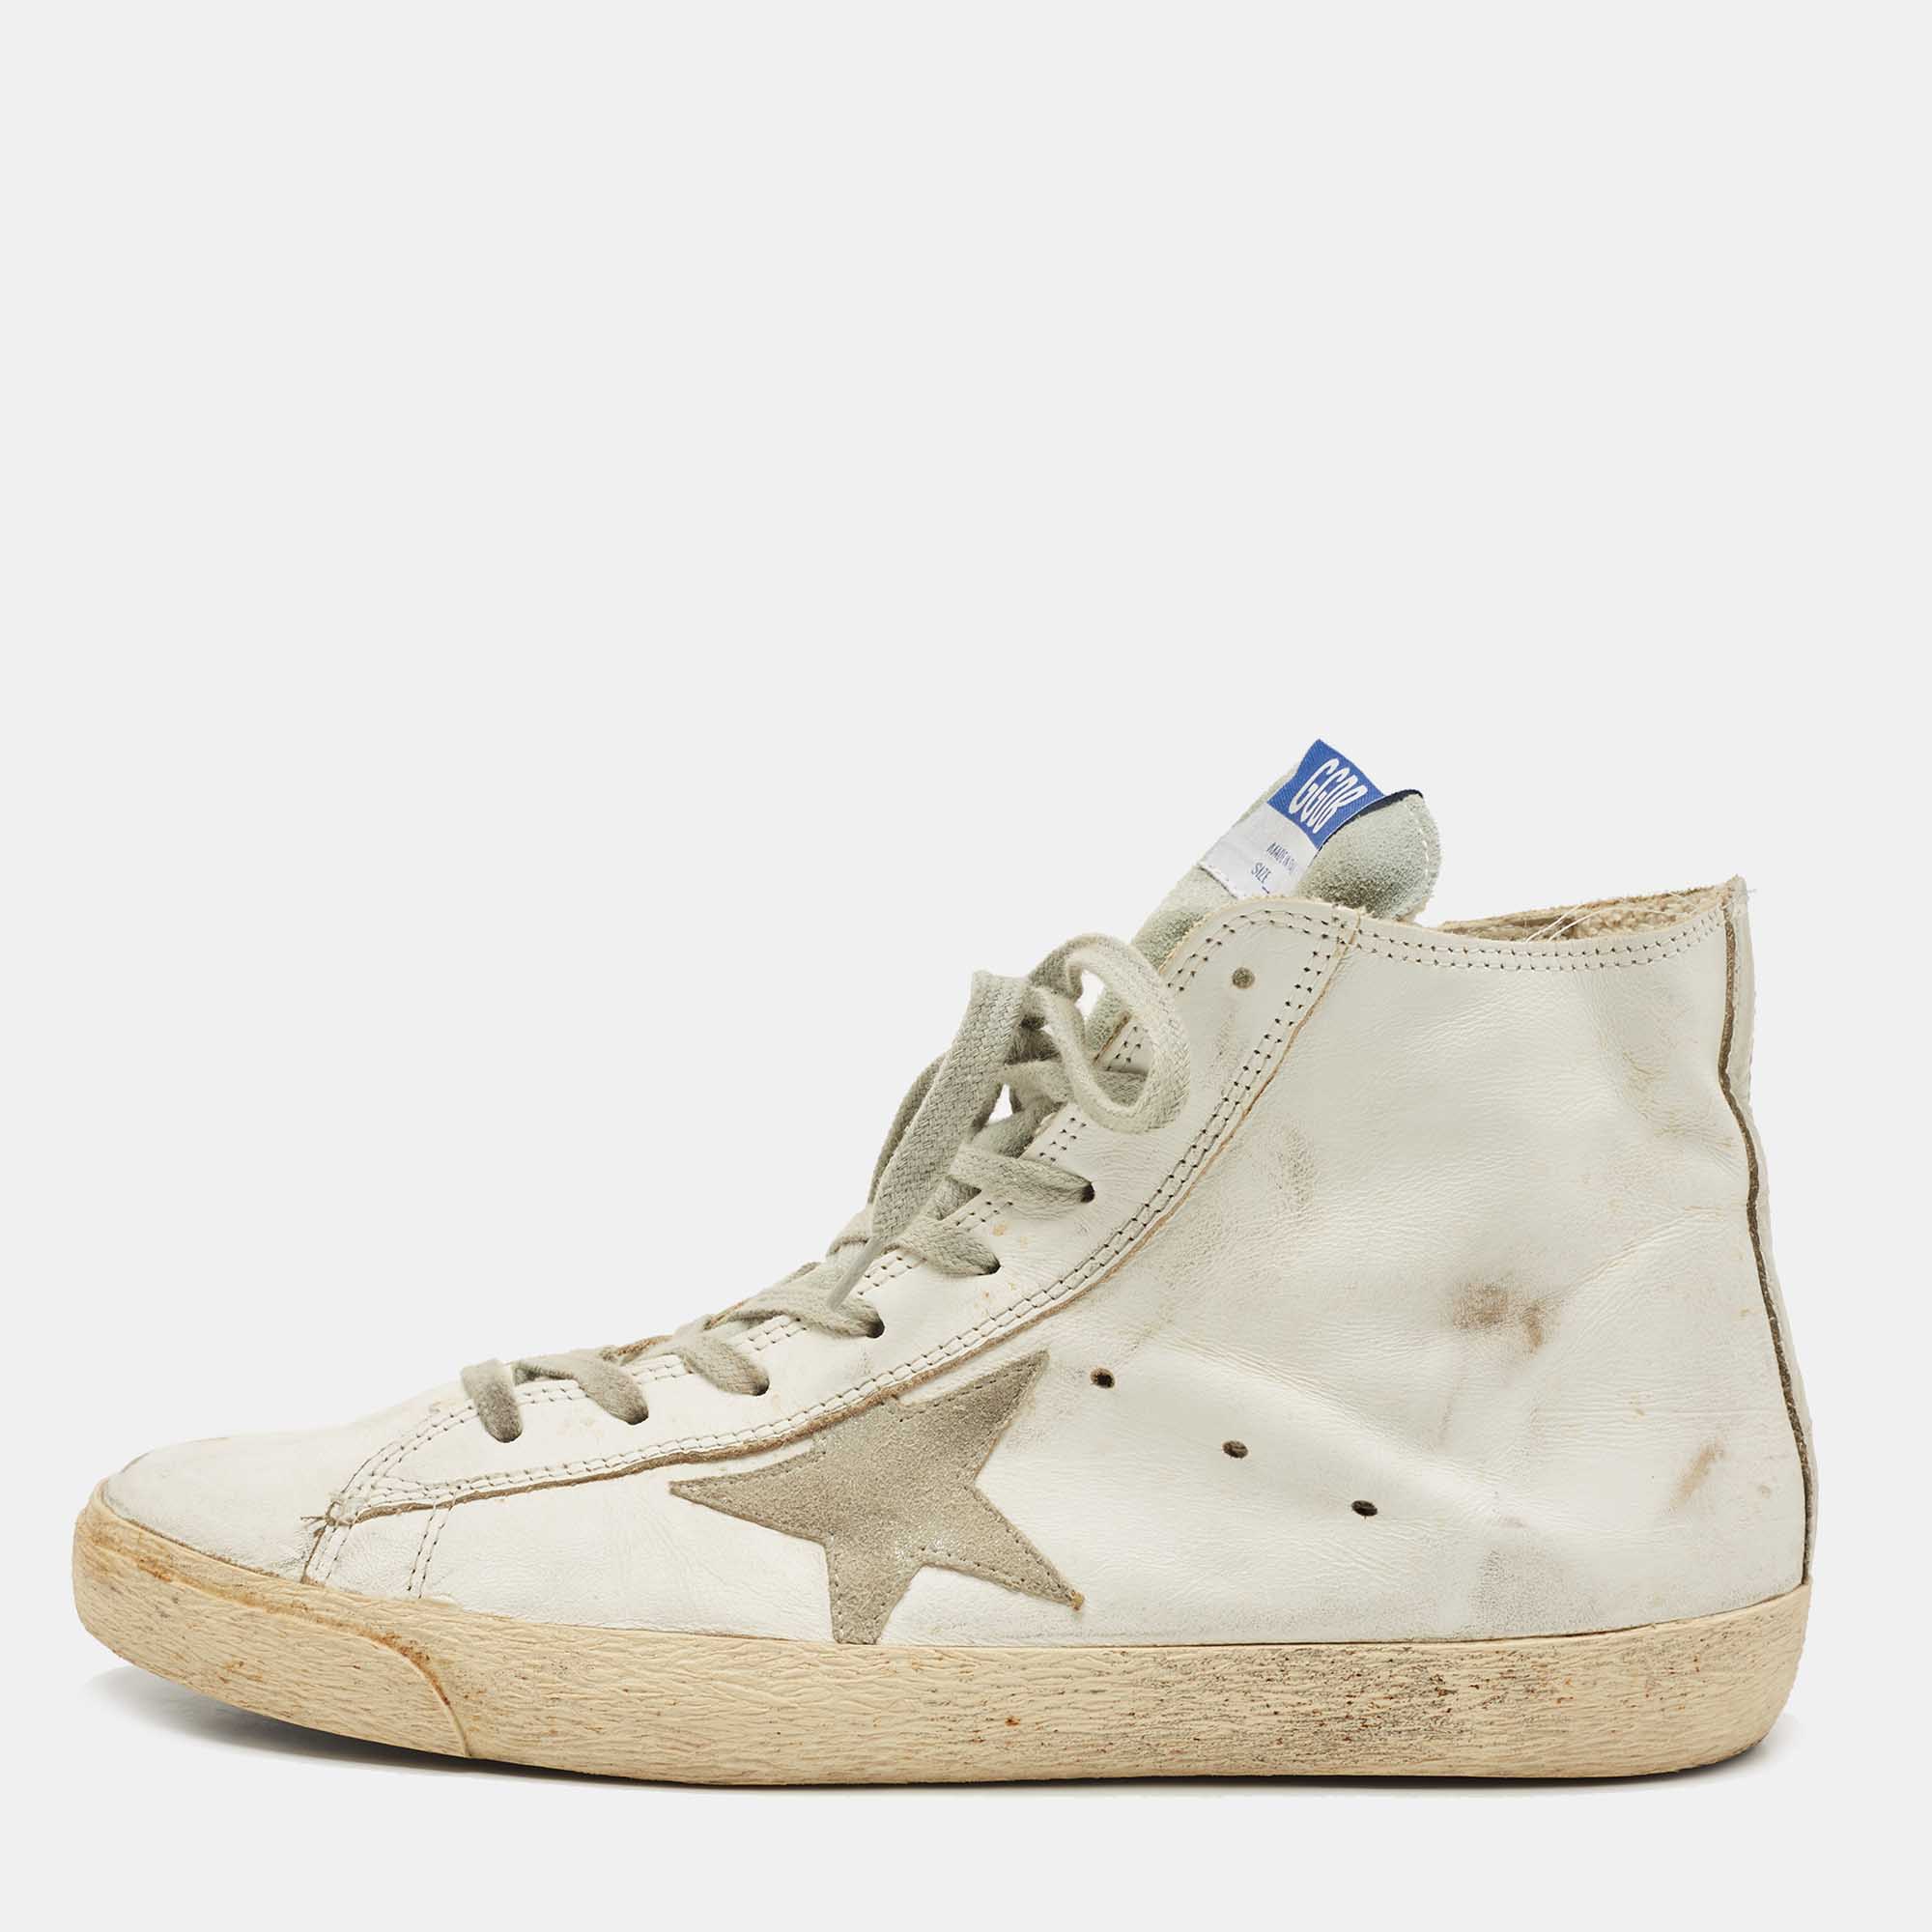 Golden goose white leather francy high top sneakers size 43